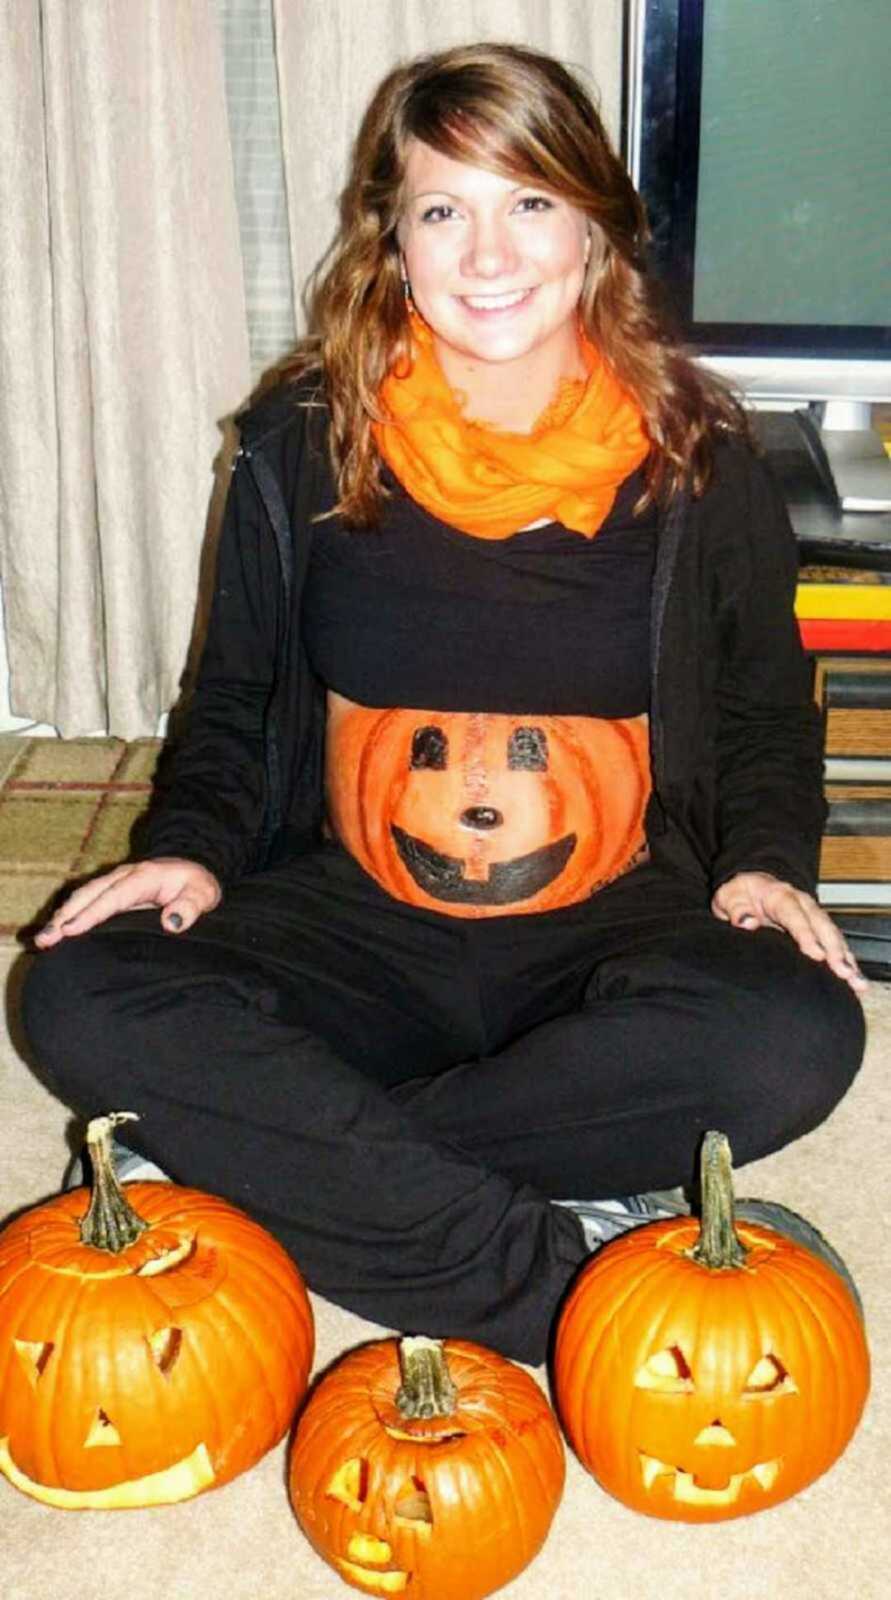 Teen mom with painted pumpkin on pregnant belly